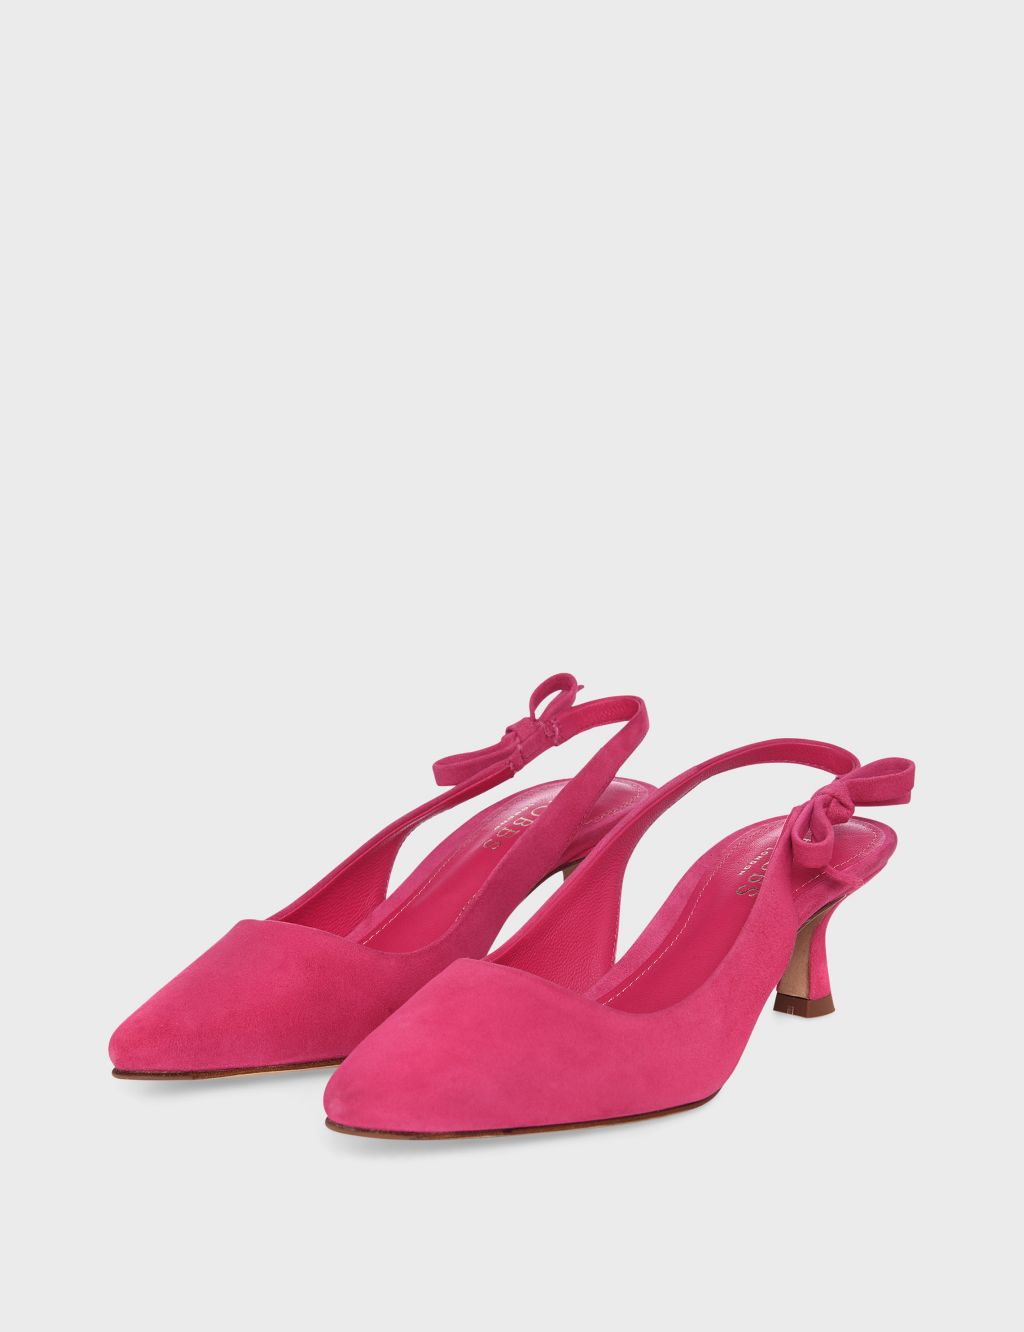 Suede Bow Kitten Heel Slingback Shoes image 3